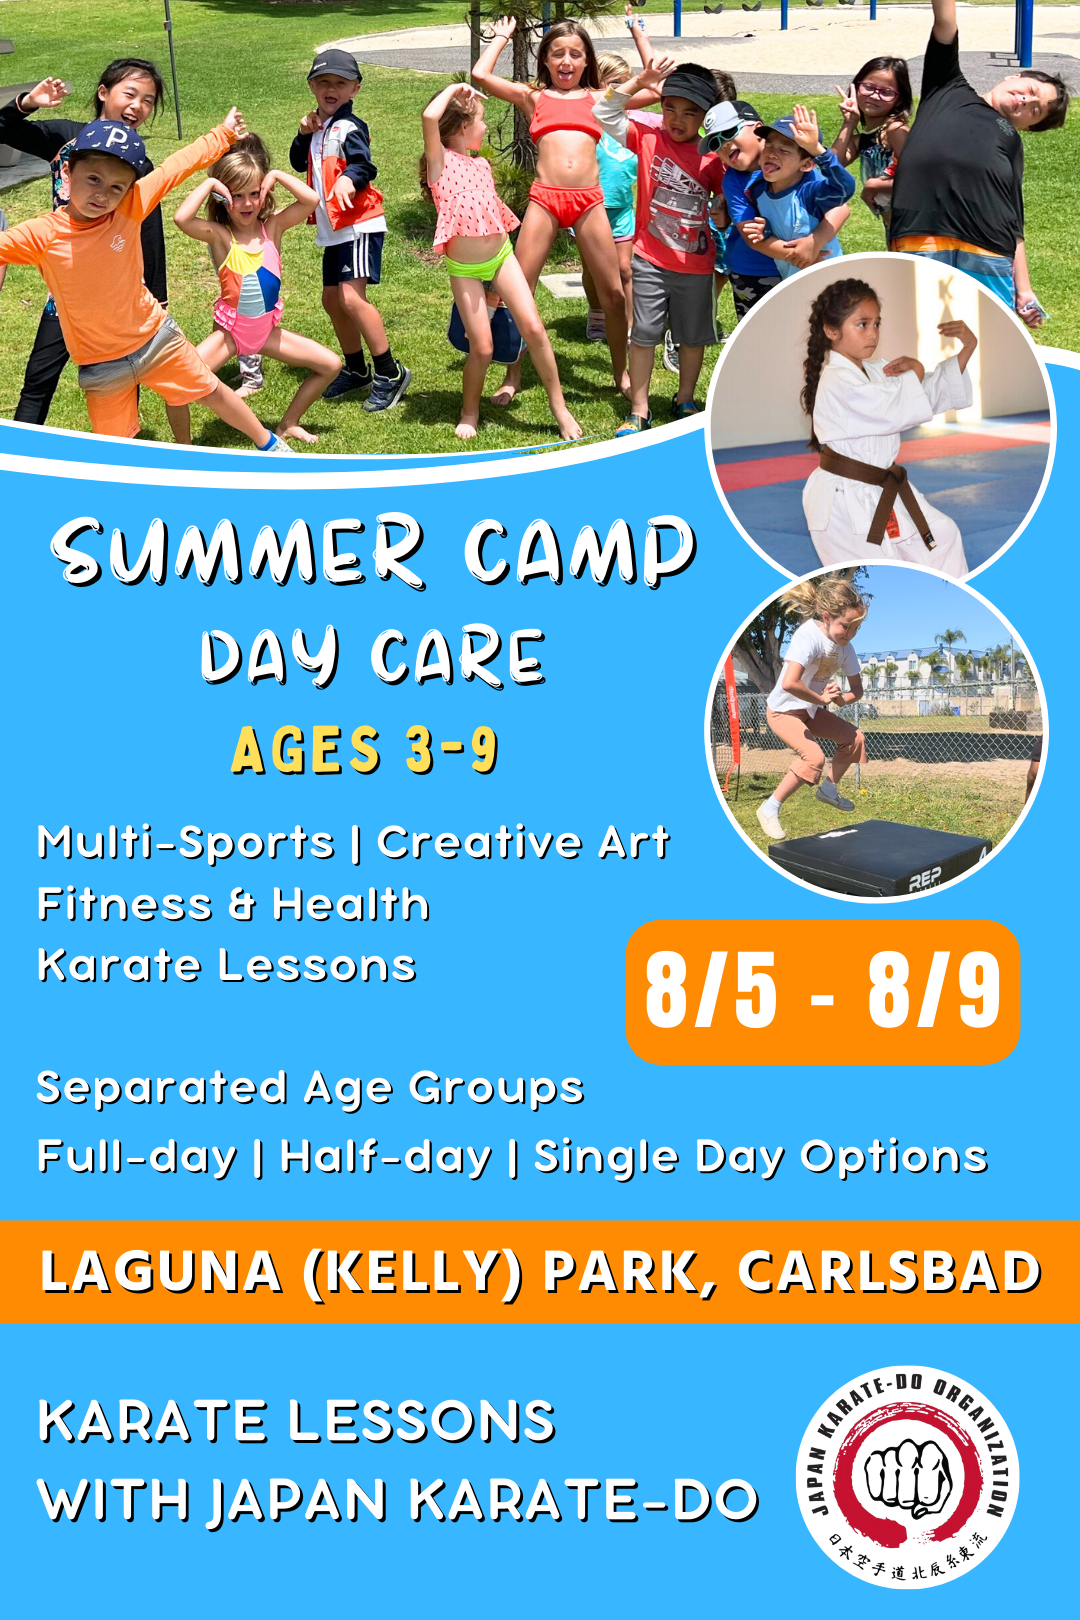 8/5 - 8/9  | Mon - Fri | 8:30 - 4:00<br>Multi-Sports, Art, and Karate<br>Laguna (Kelly) Park, Carlsbad<br>Ages 3-9 | Separated Age Groups